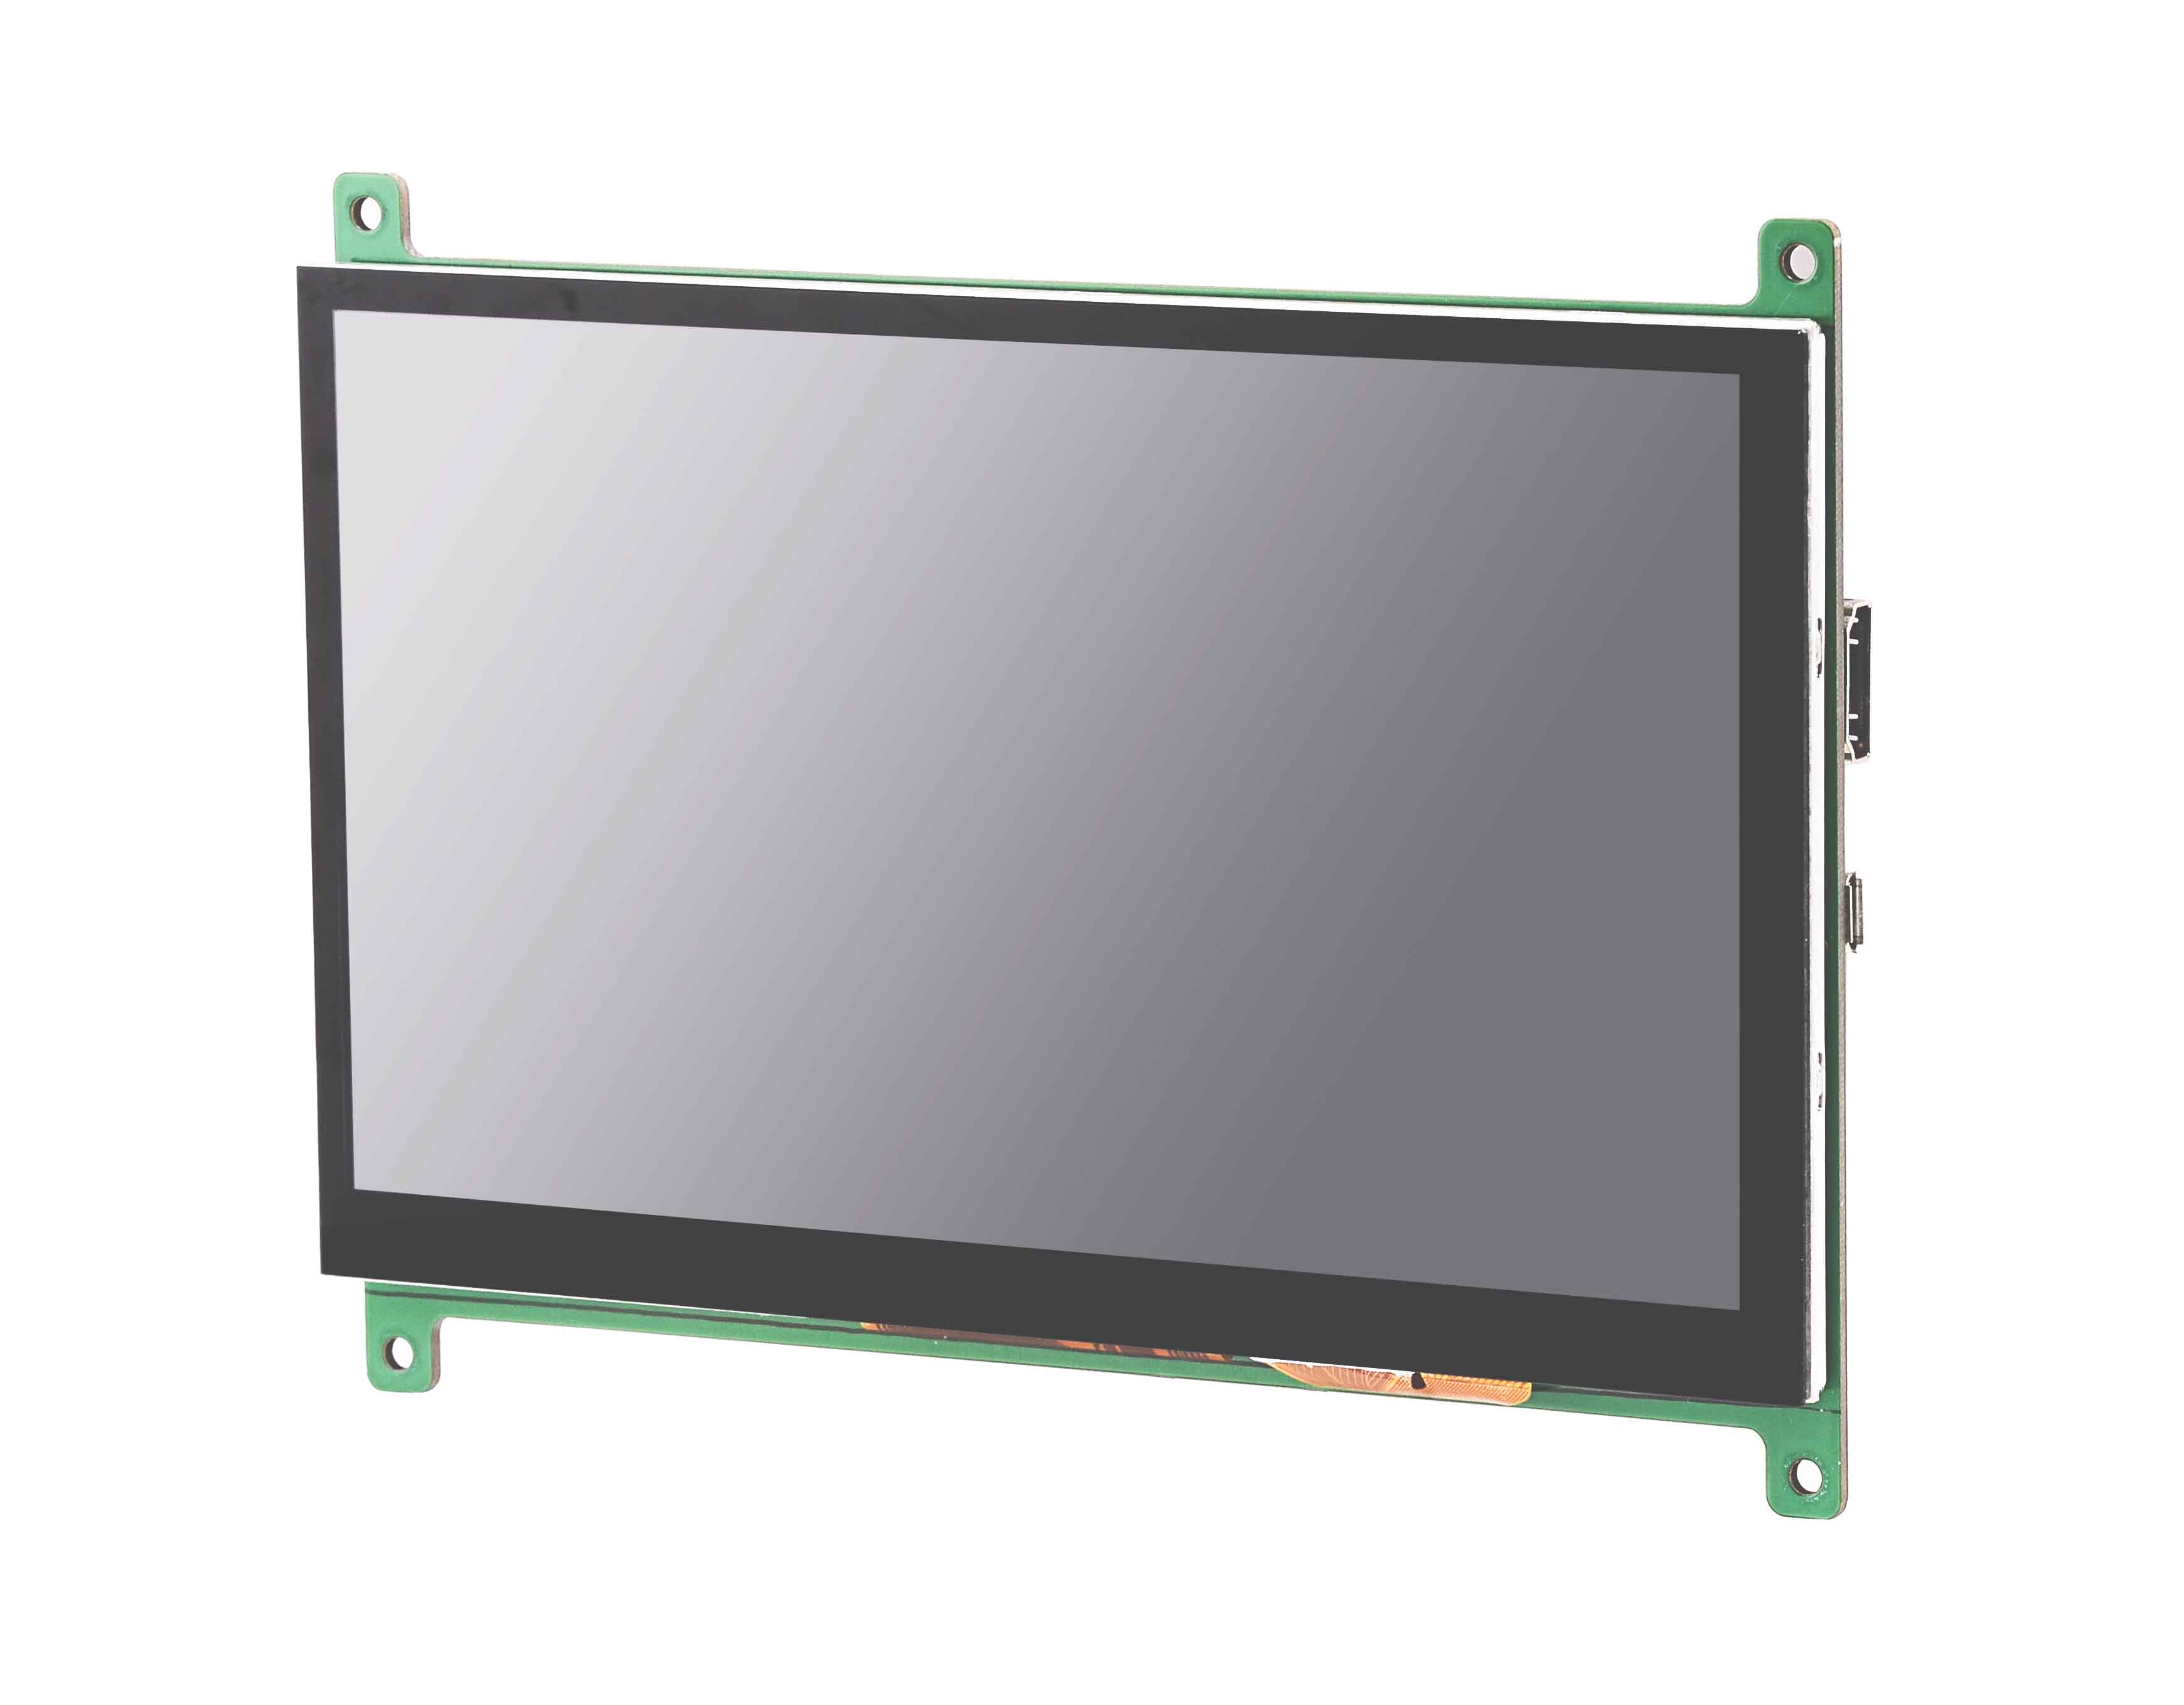 7 inch HDMI LCD Display For Raspberry pi